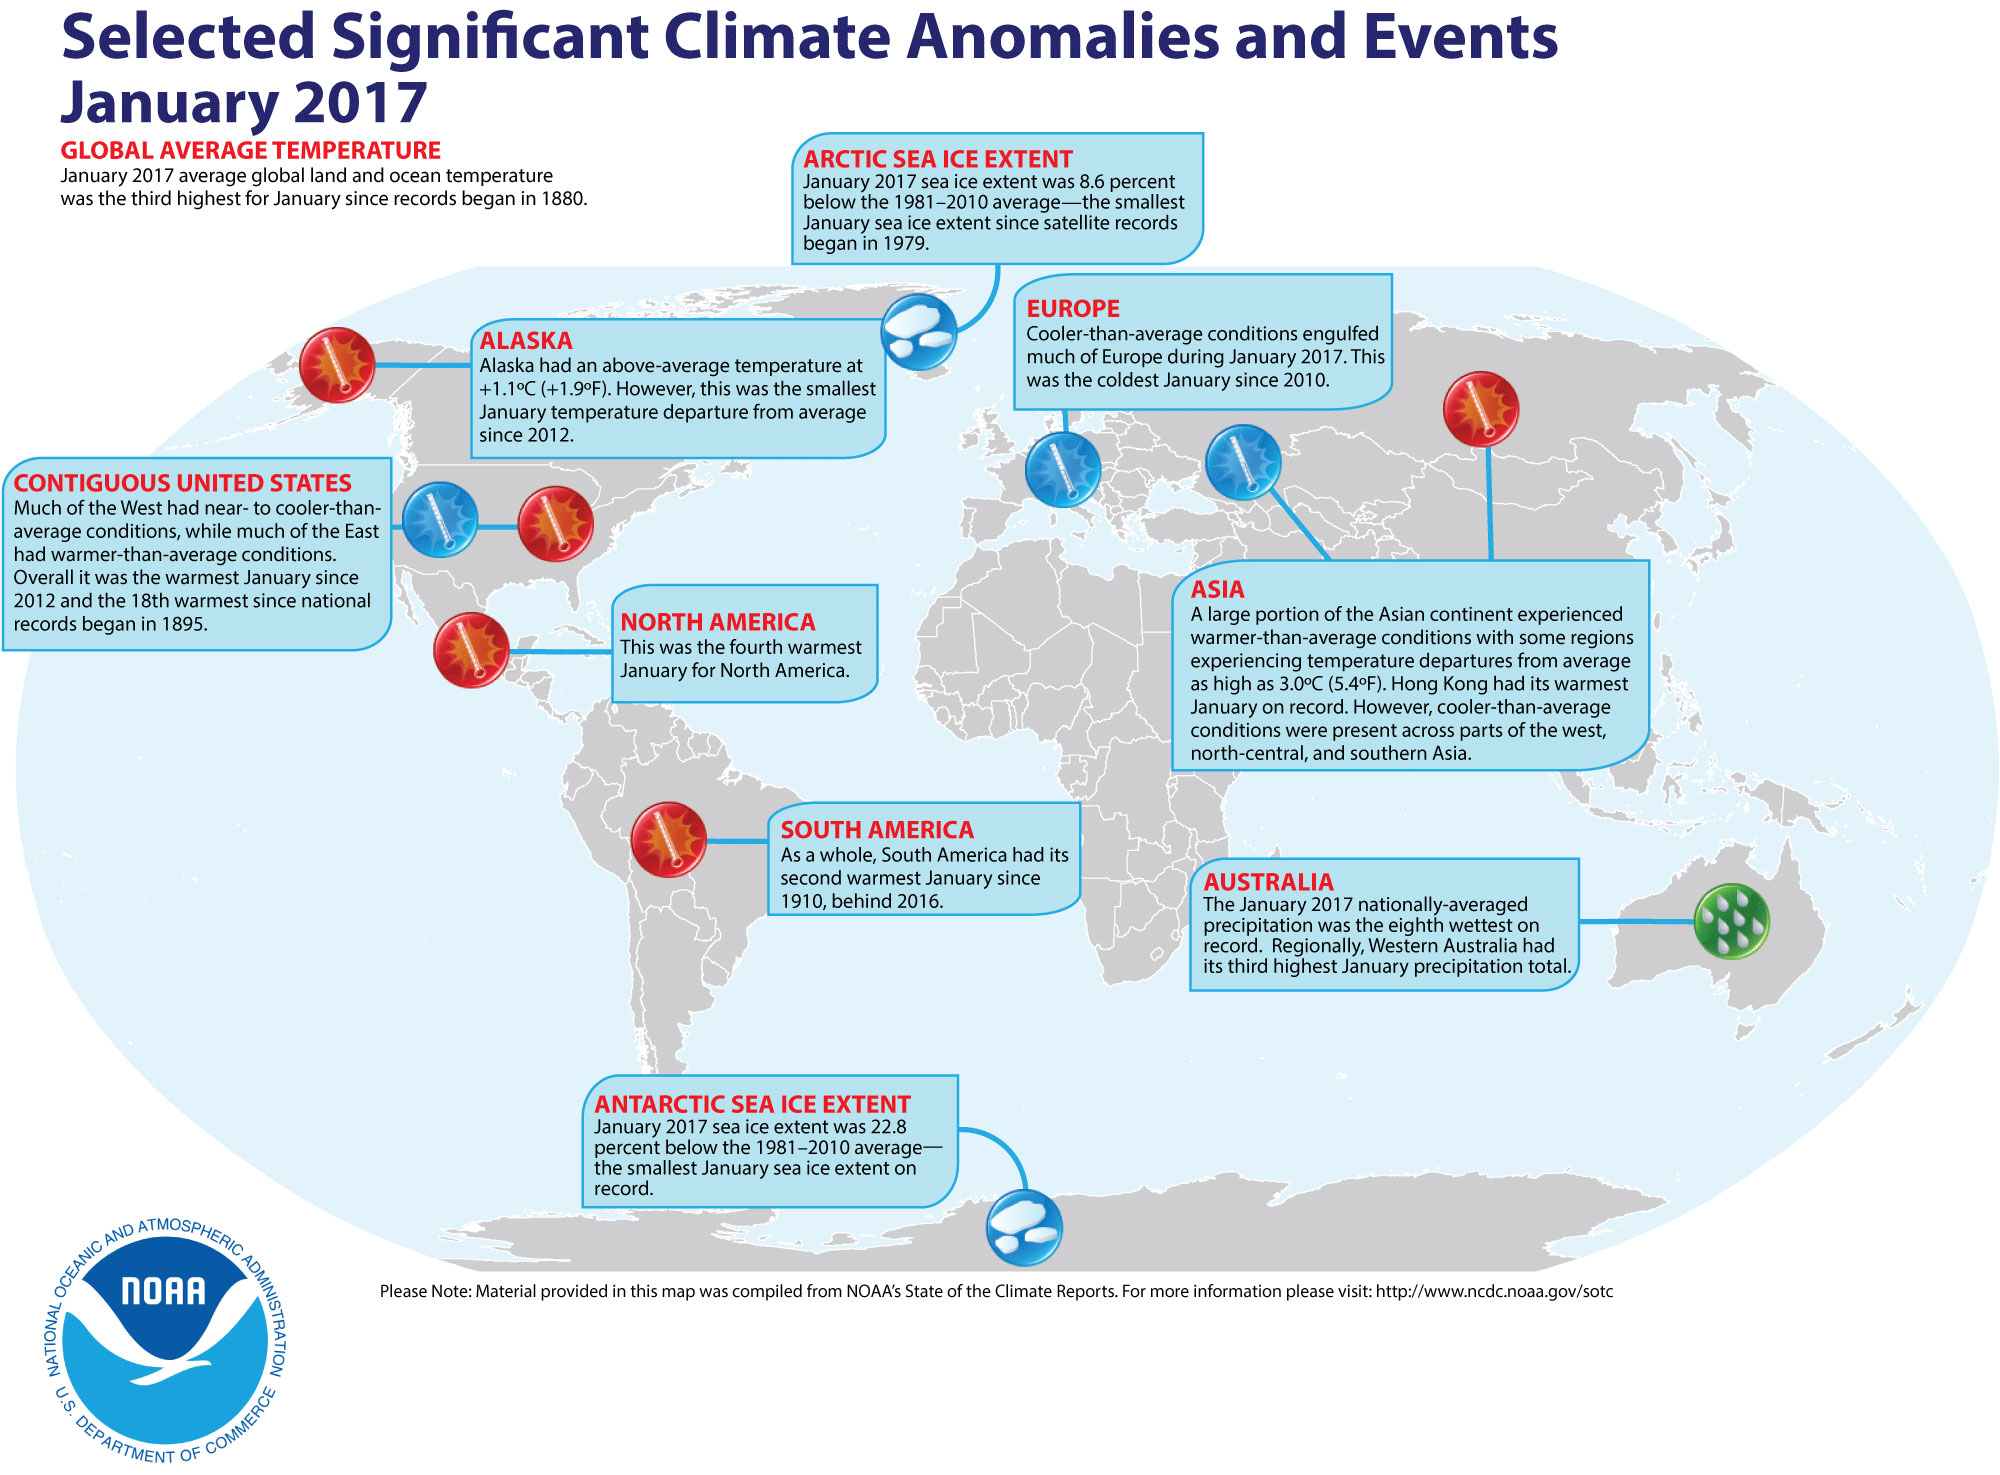 Noteworthy climate events around the world in January 2017